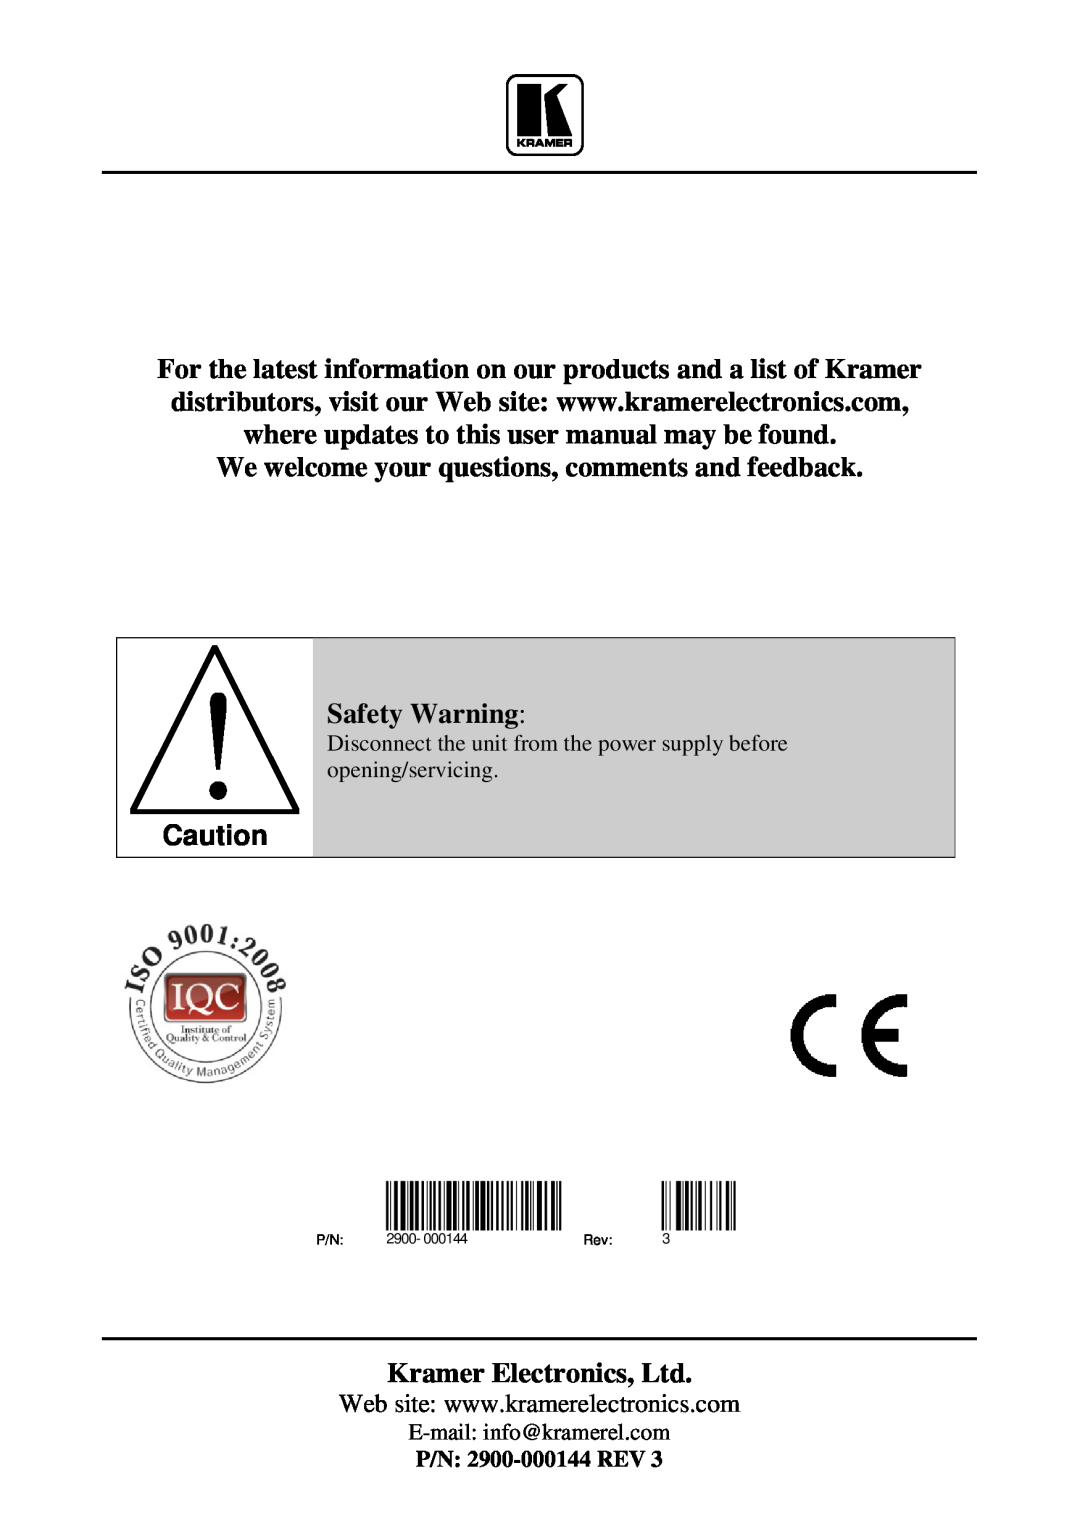 Kramer Electronics TP-9 user manual We welcome your questions, comments and feedback Safety Warning, P/N 2900-000144 REV 